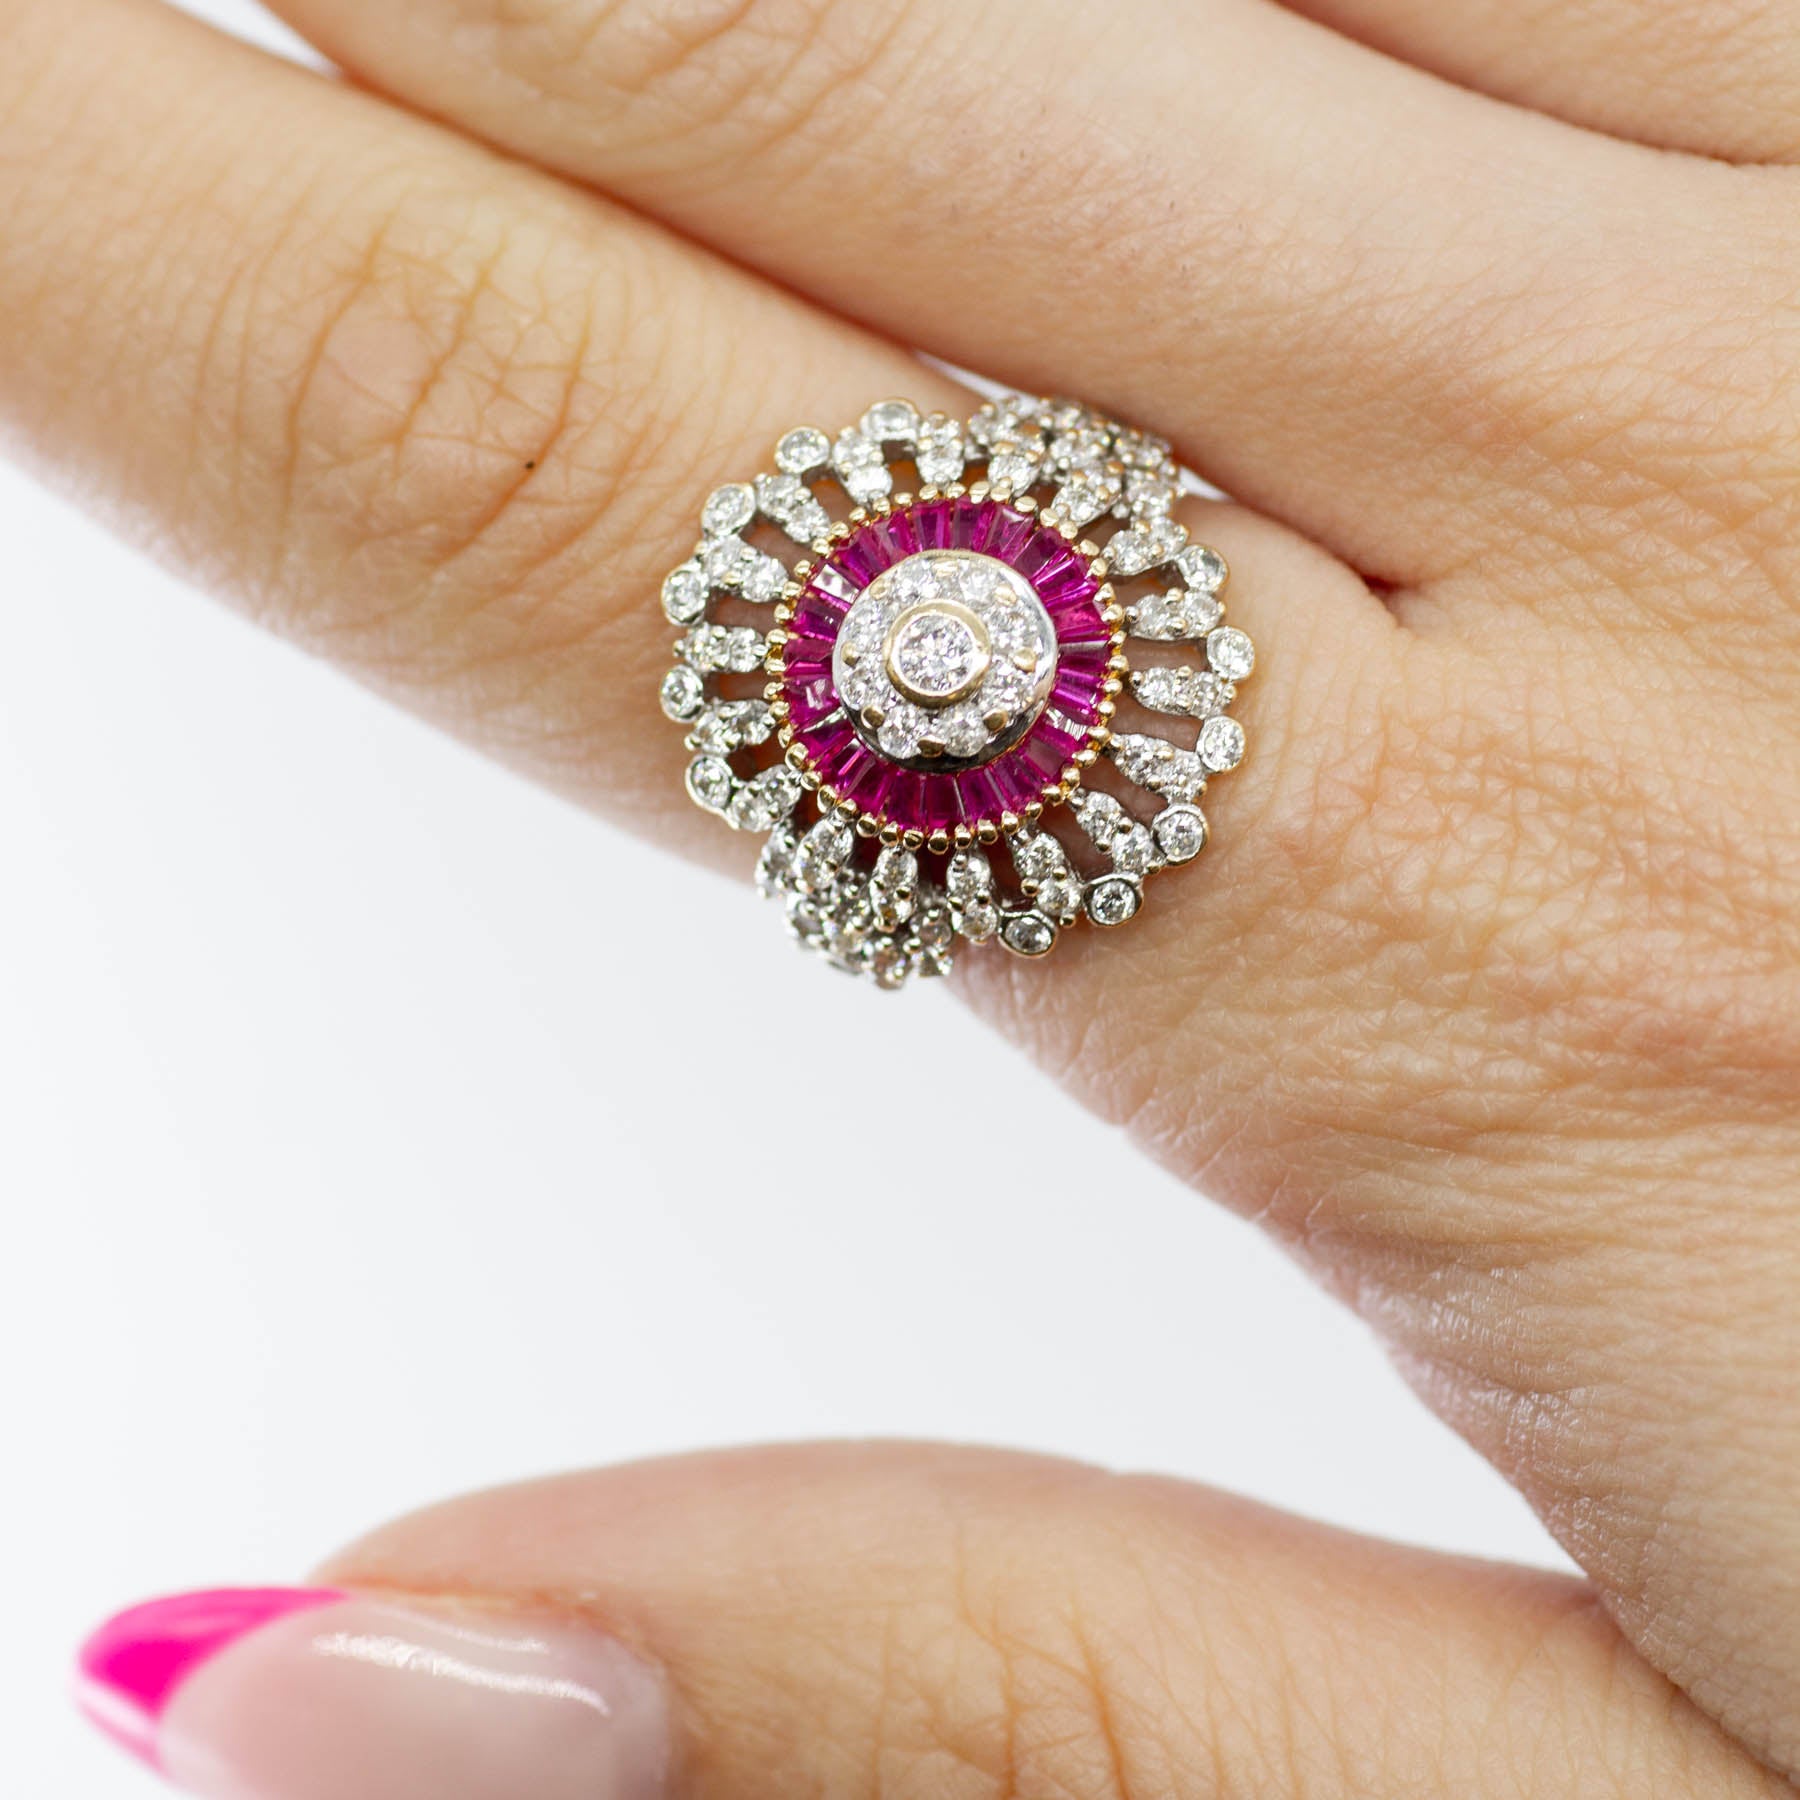 Diamond and Ruby Halo Cocktail Ring | 0.65 ctw 0.46 ctw | SZ 6.25